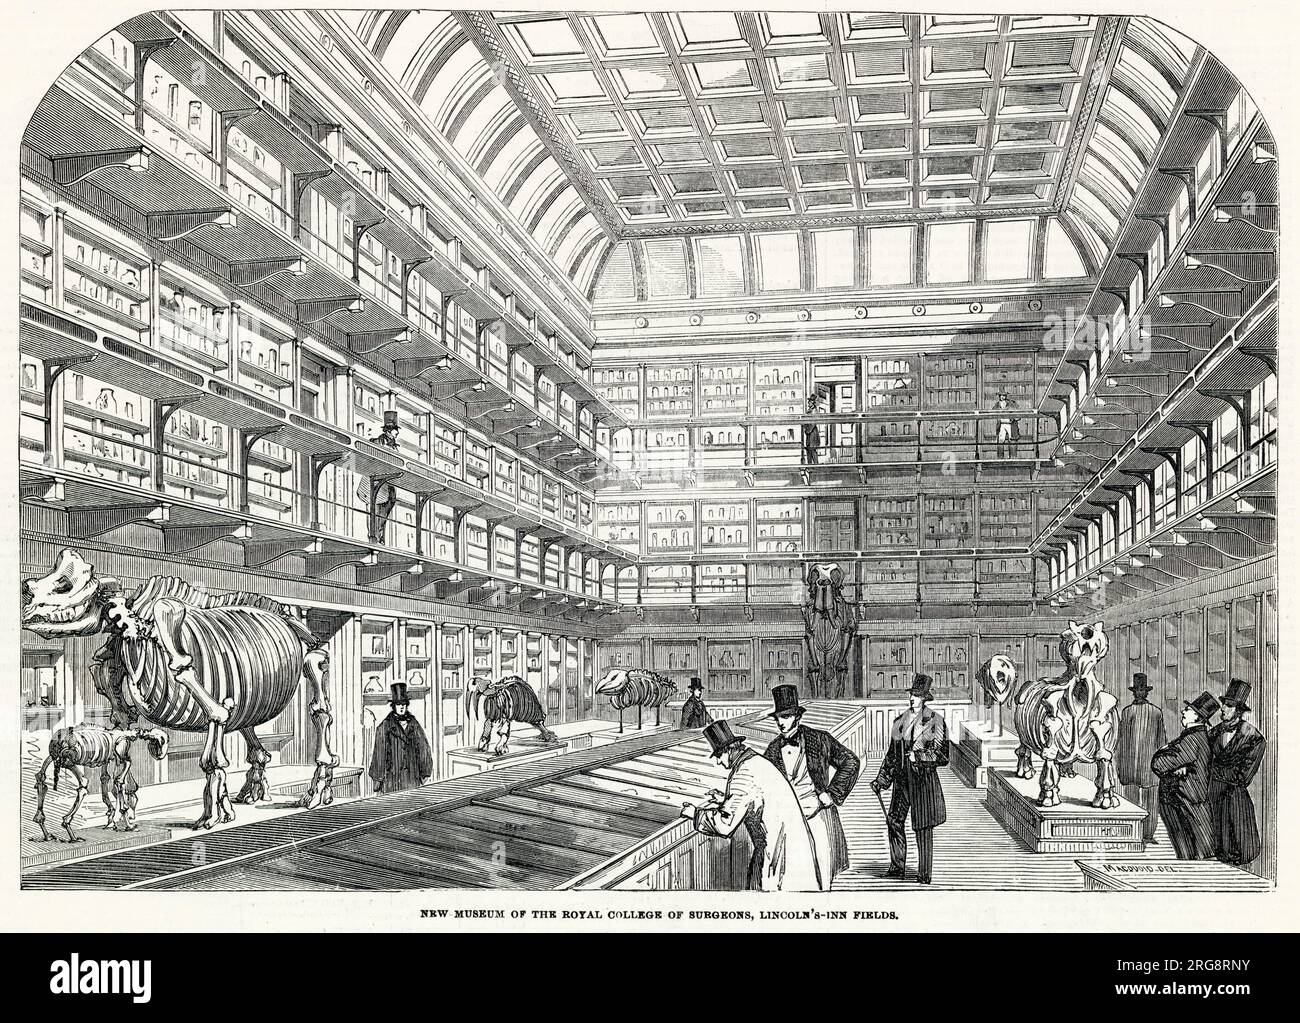 Interior of the new museum, Royal College of Surgeons, located at Lincoln's Inn Fields in London. Stock Photo